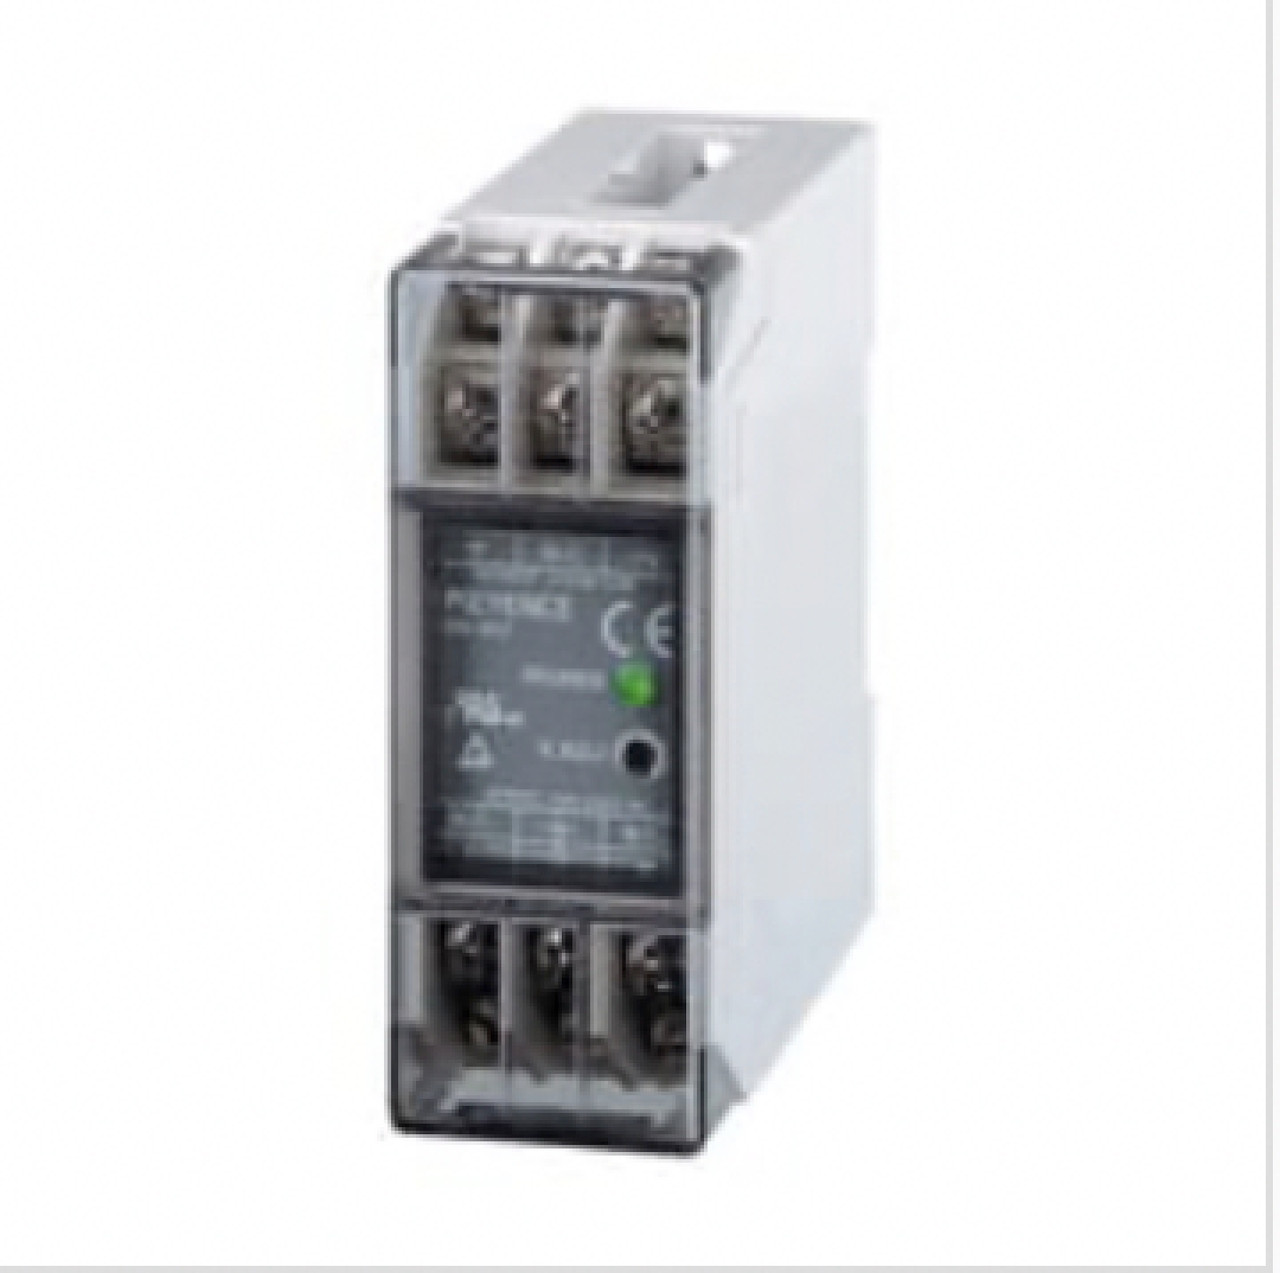 Keyence MS-F07 Compact Switching Power Supply, Output Current 0.65 A, 12-V Type [New]